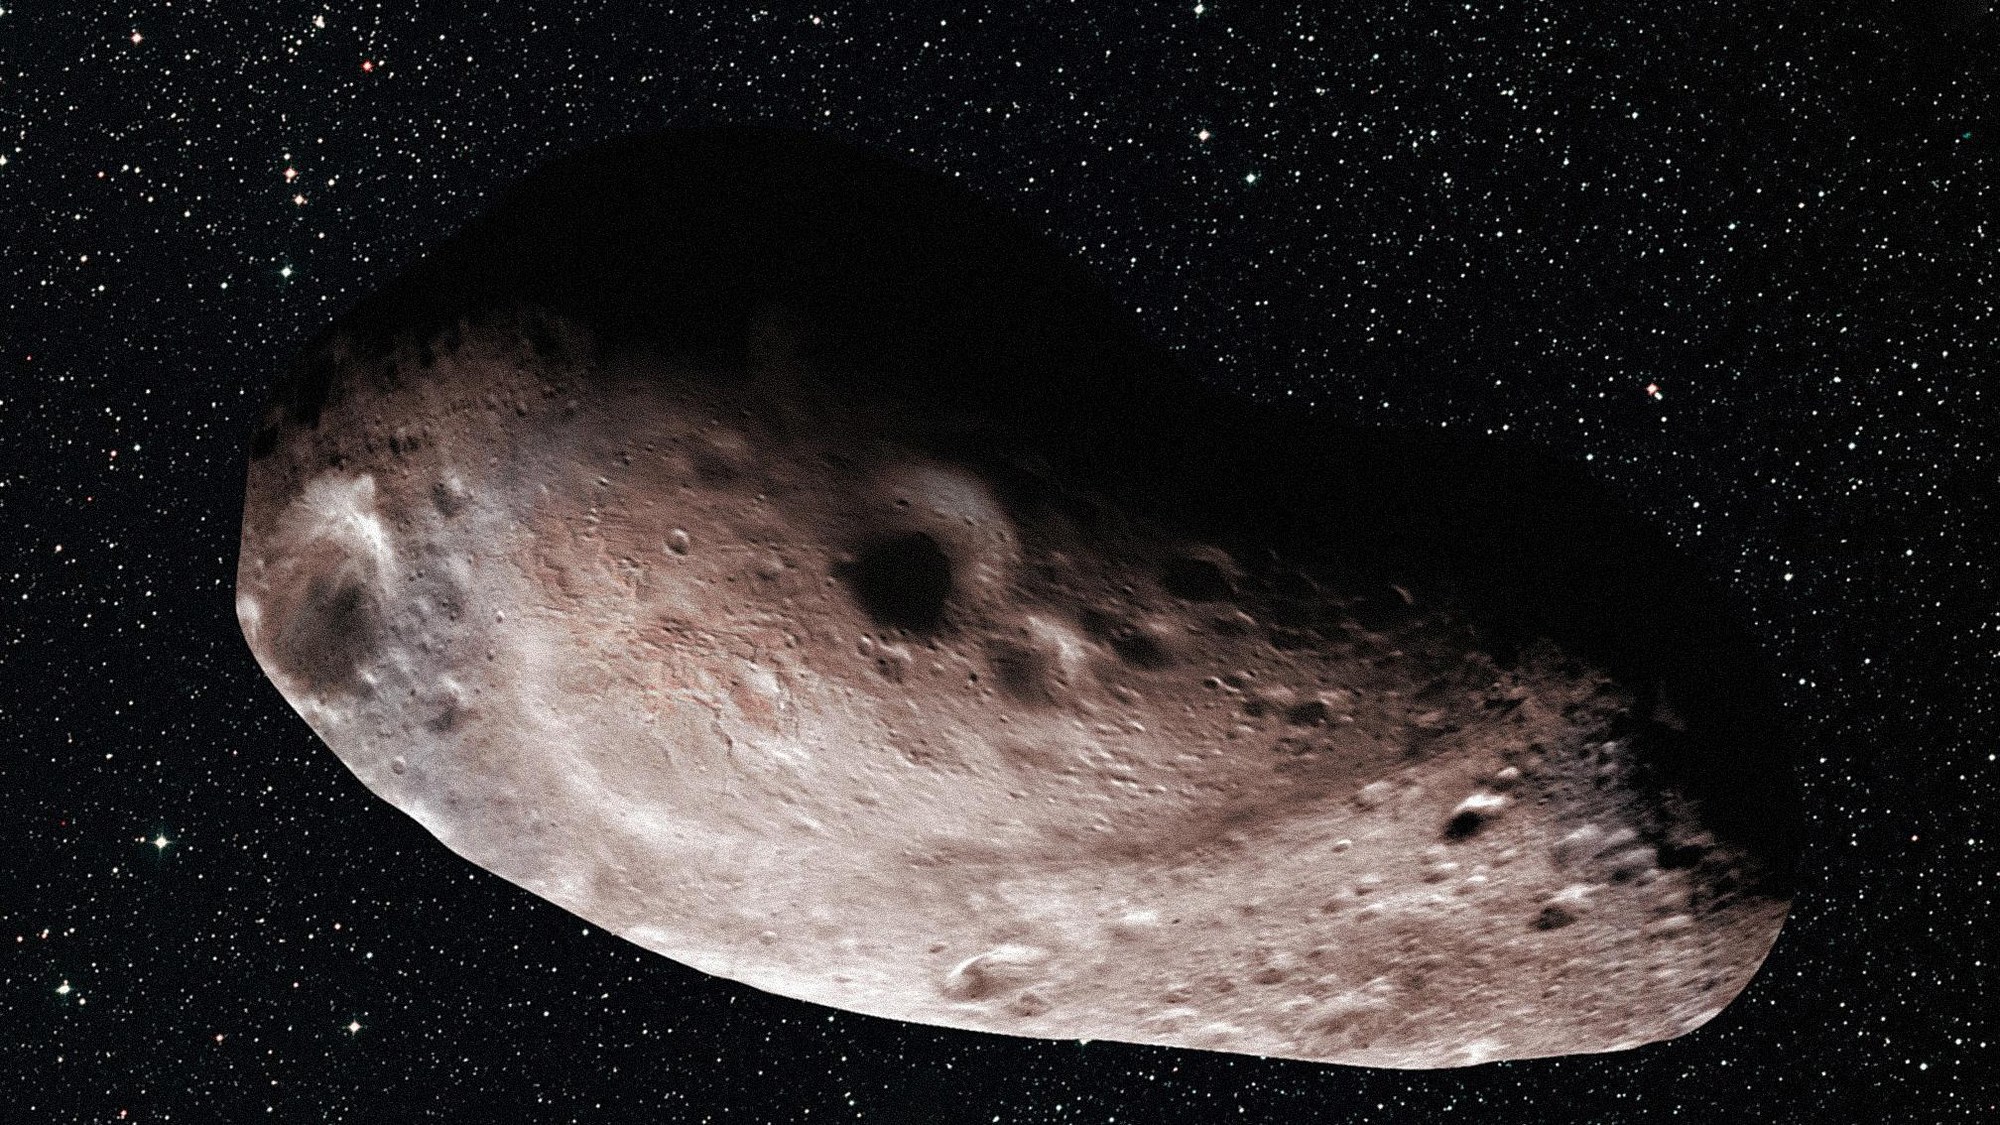 Artist’s impression of Ultima Thule as a single body